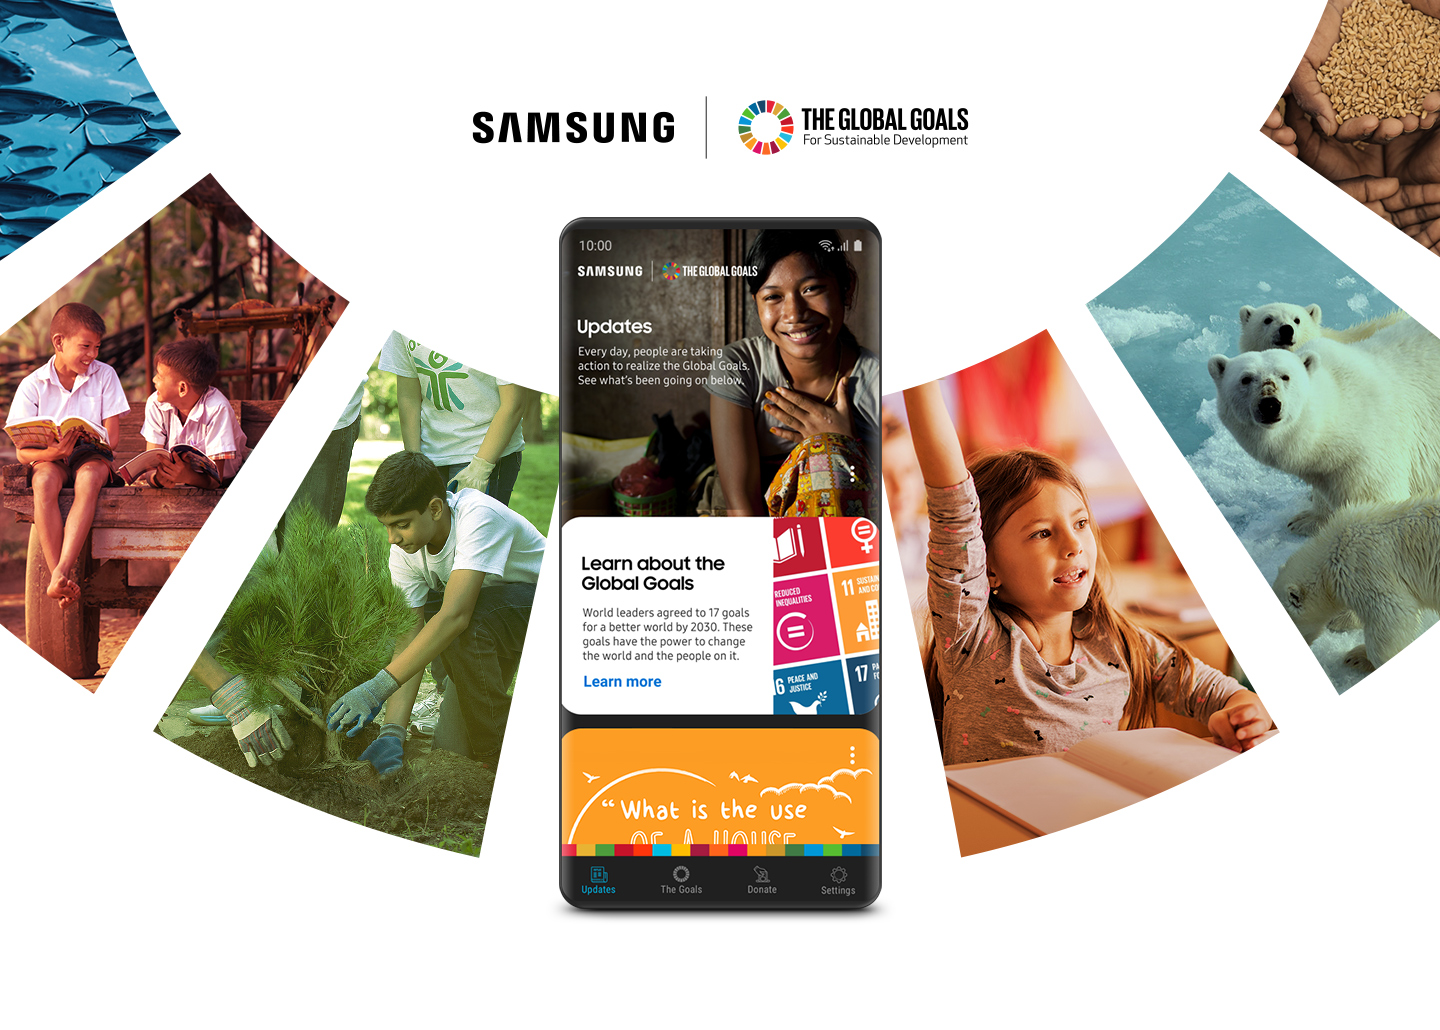 A Galaxy smartphone with a simulated Samsung Global Goals app interface is in front of a ring of collaged images representing the United Nations Sustainable Development Goals. Samsung has partnered with the UN to empower users to make a brighter future for all.